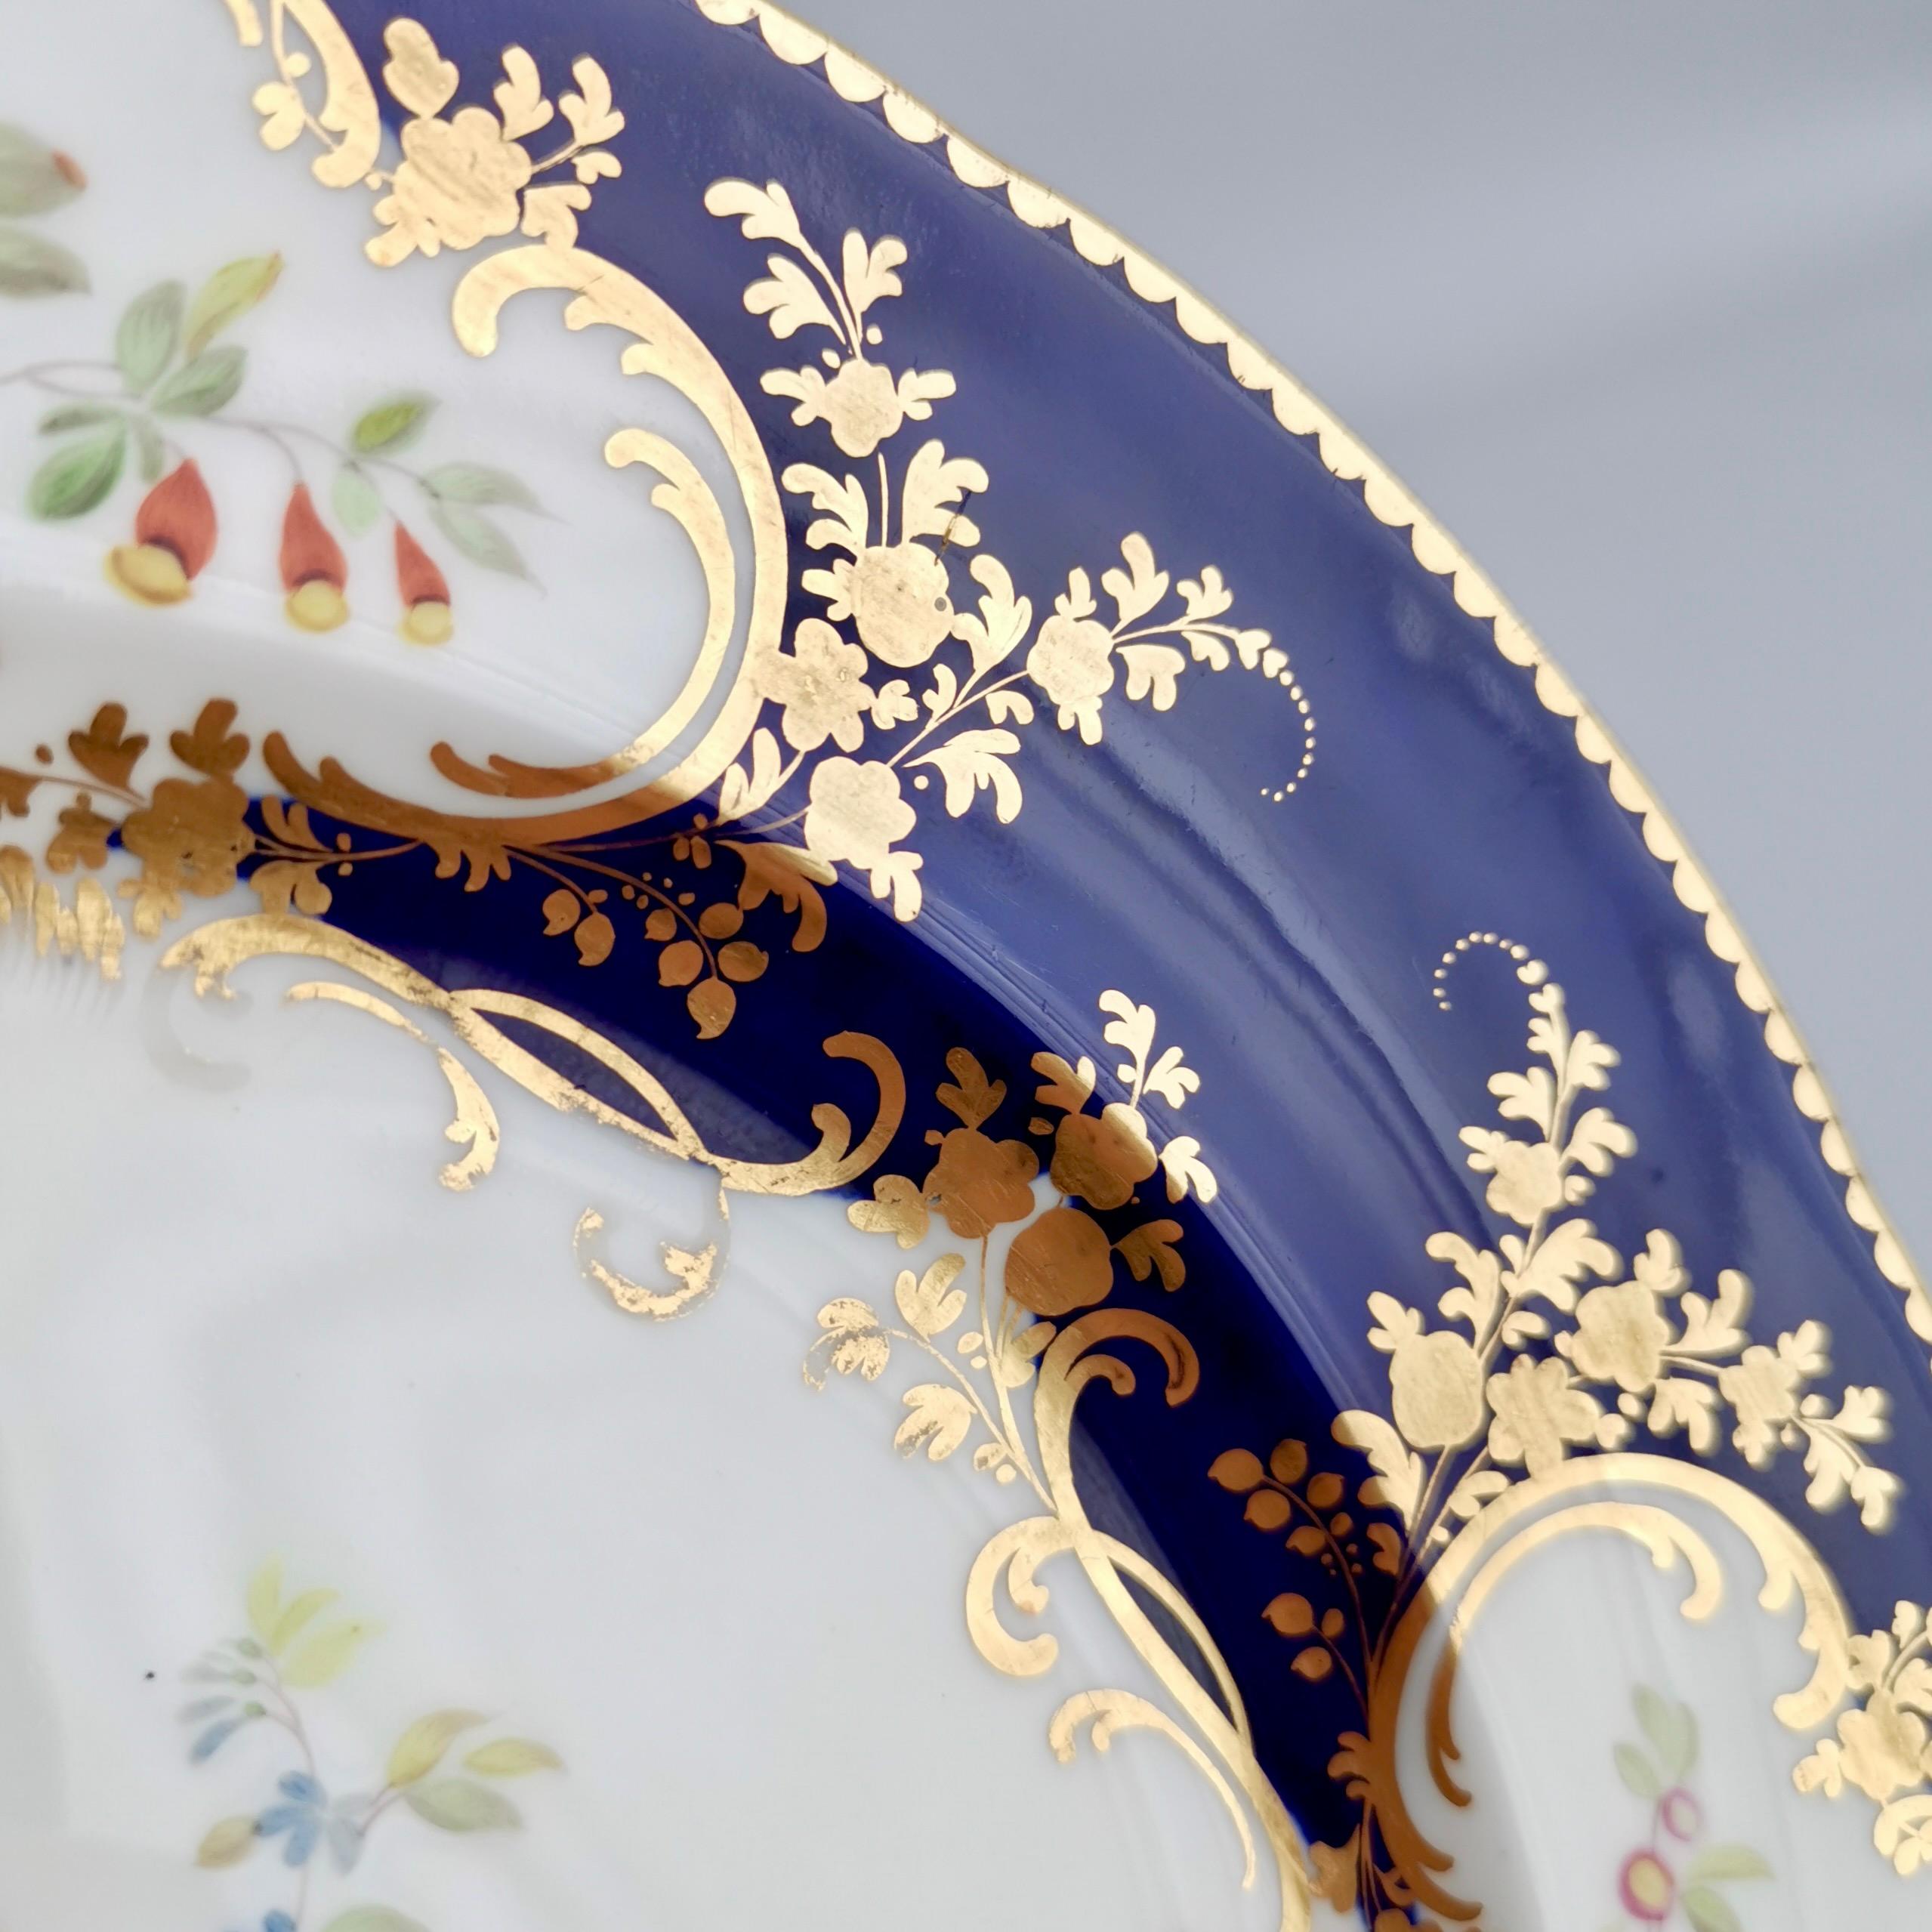 Hand-Painted Minton Porcelain Plate, Cobalt Blue with Floral Reserves, Victorian ca 1840